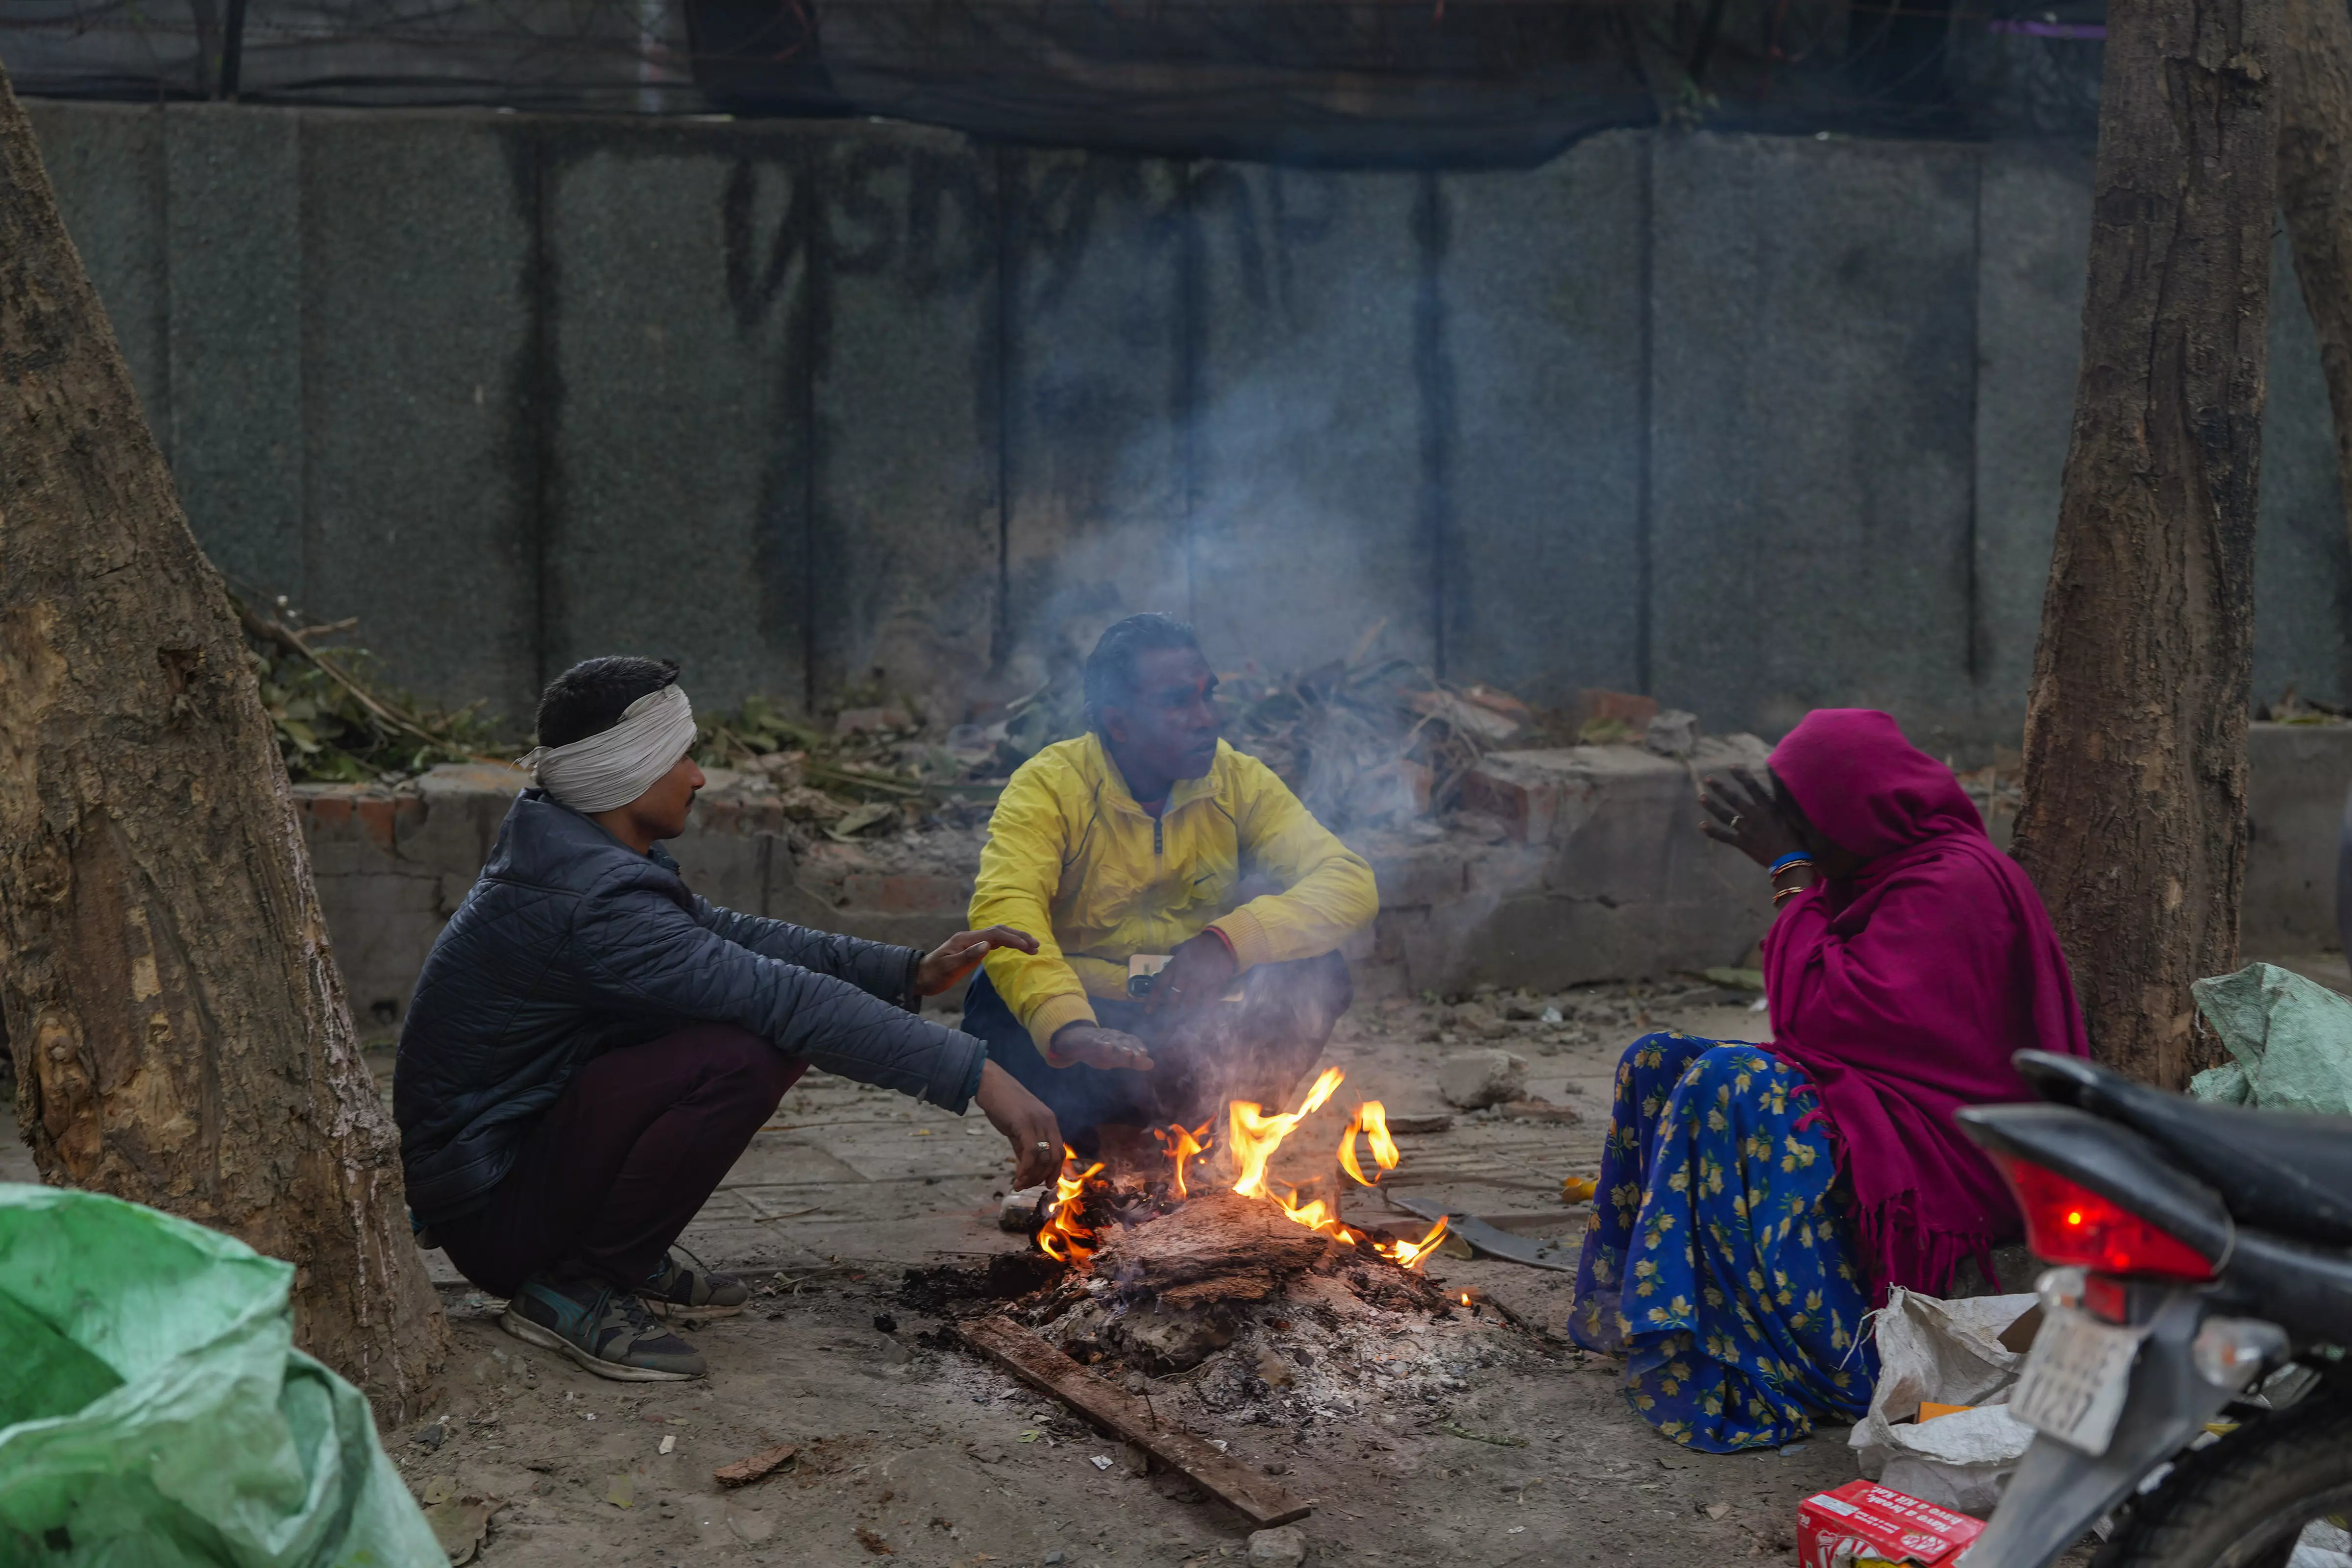 Delhi has been colder this winter; lowest average max temperature in 13 years